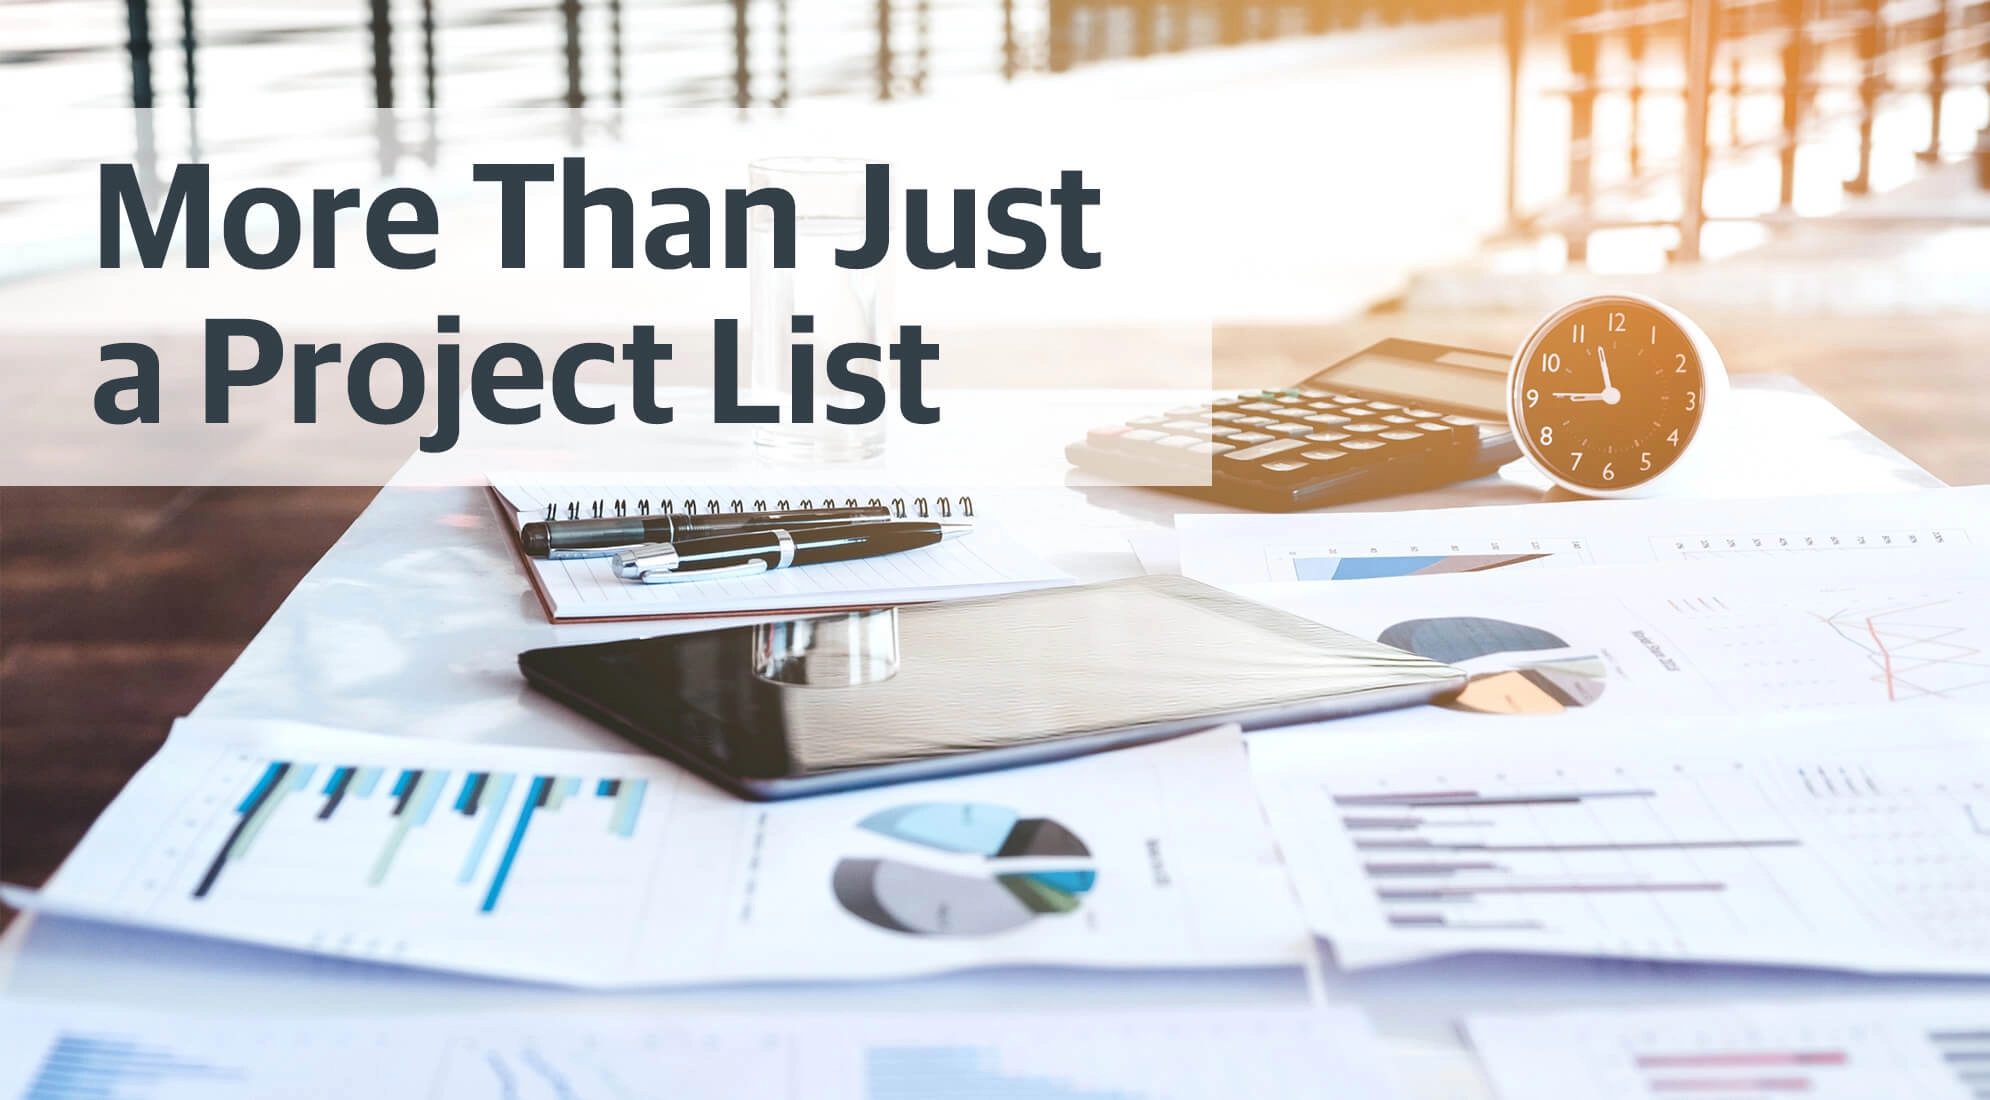 More Than Just a Project List 2